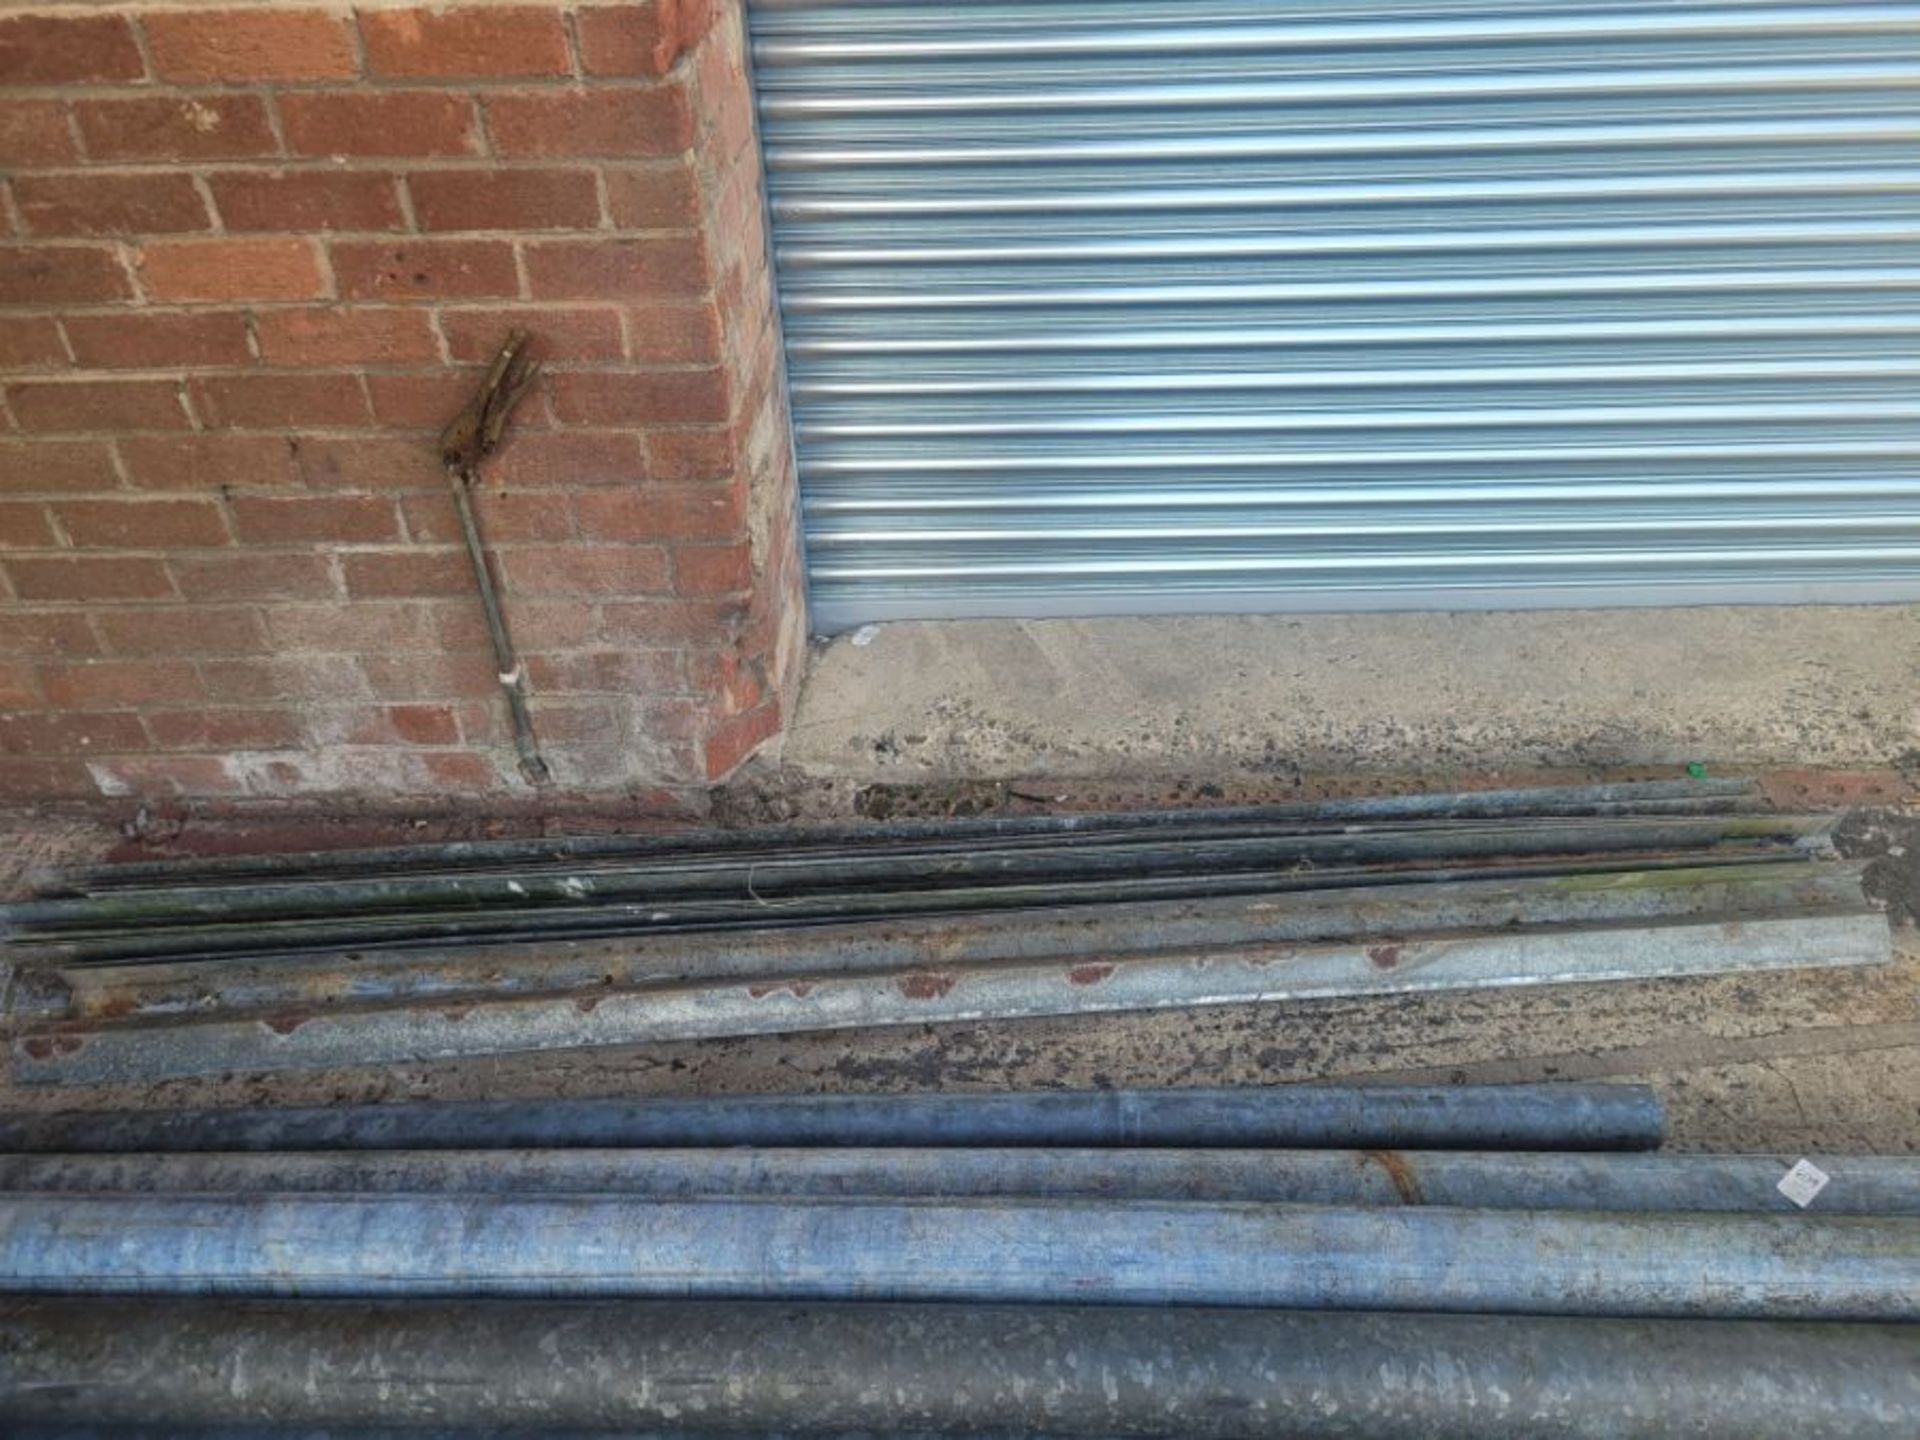 BUNDLE OF GALVANISED ANGLE IRON APPROX 7FOOT/2INCH (20 LENGTHS)